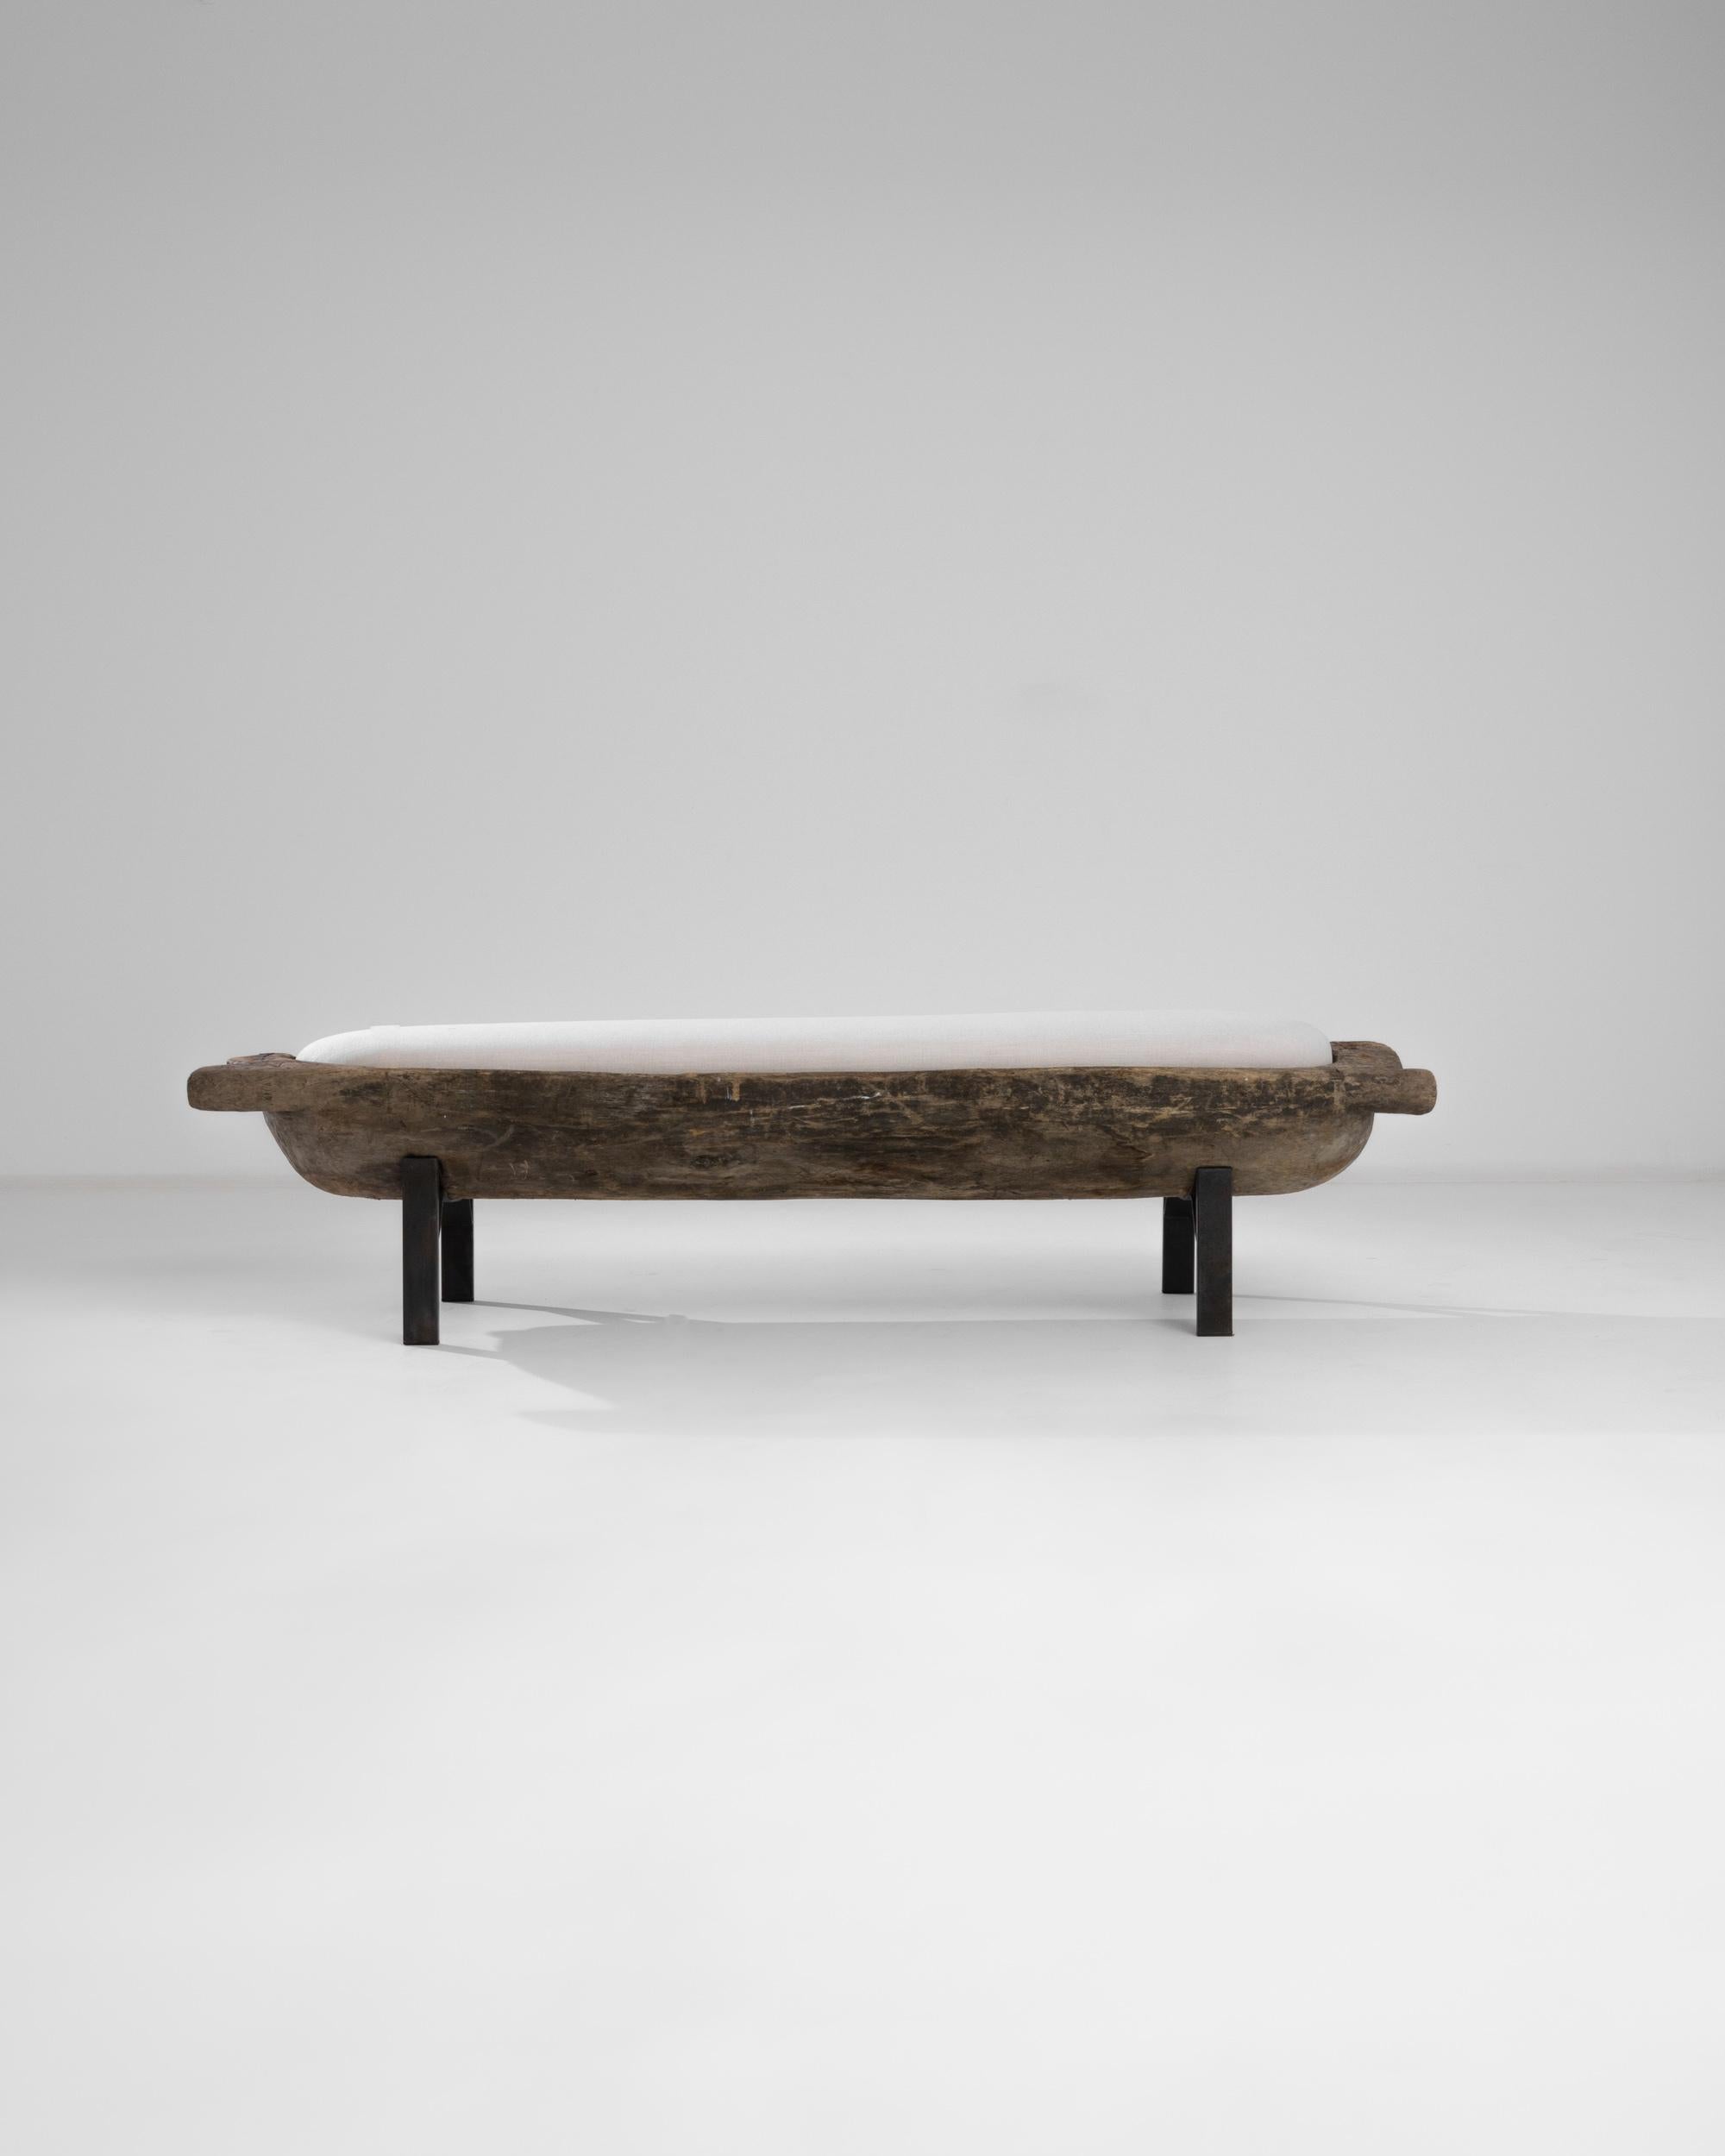 A 19th century wooden bench with an upholstered seat from Poland. A carved wooden bread trough resembling a pagoda is elevated upon black metal feet, completed by a comfortable upholstered ecru seat. The smoked coffee tone of the century-old patina